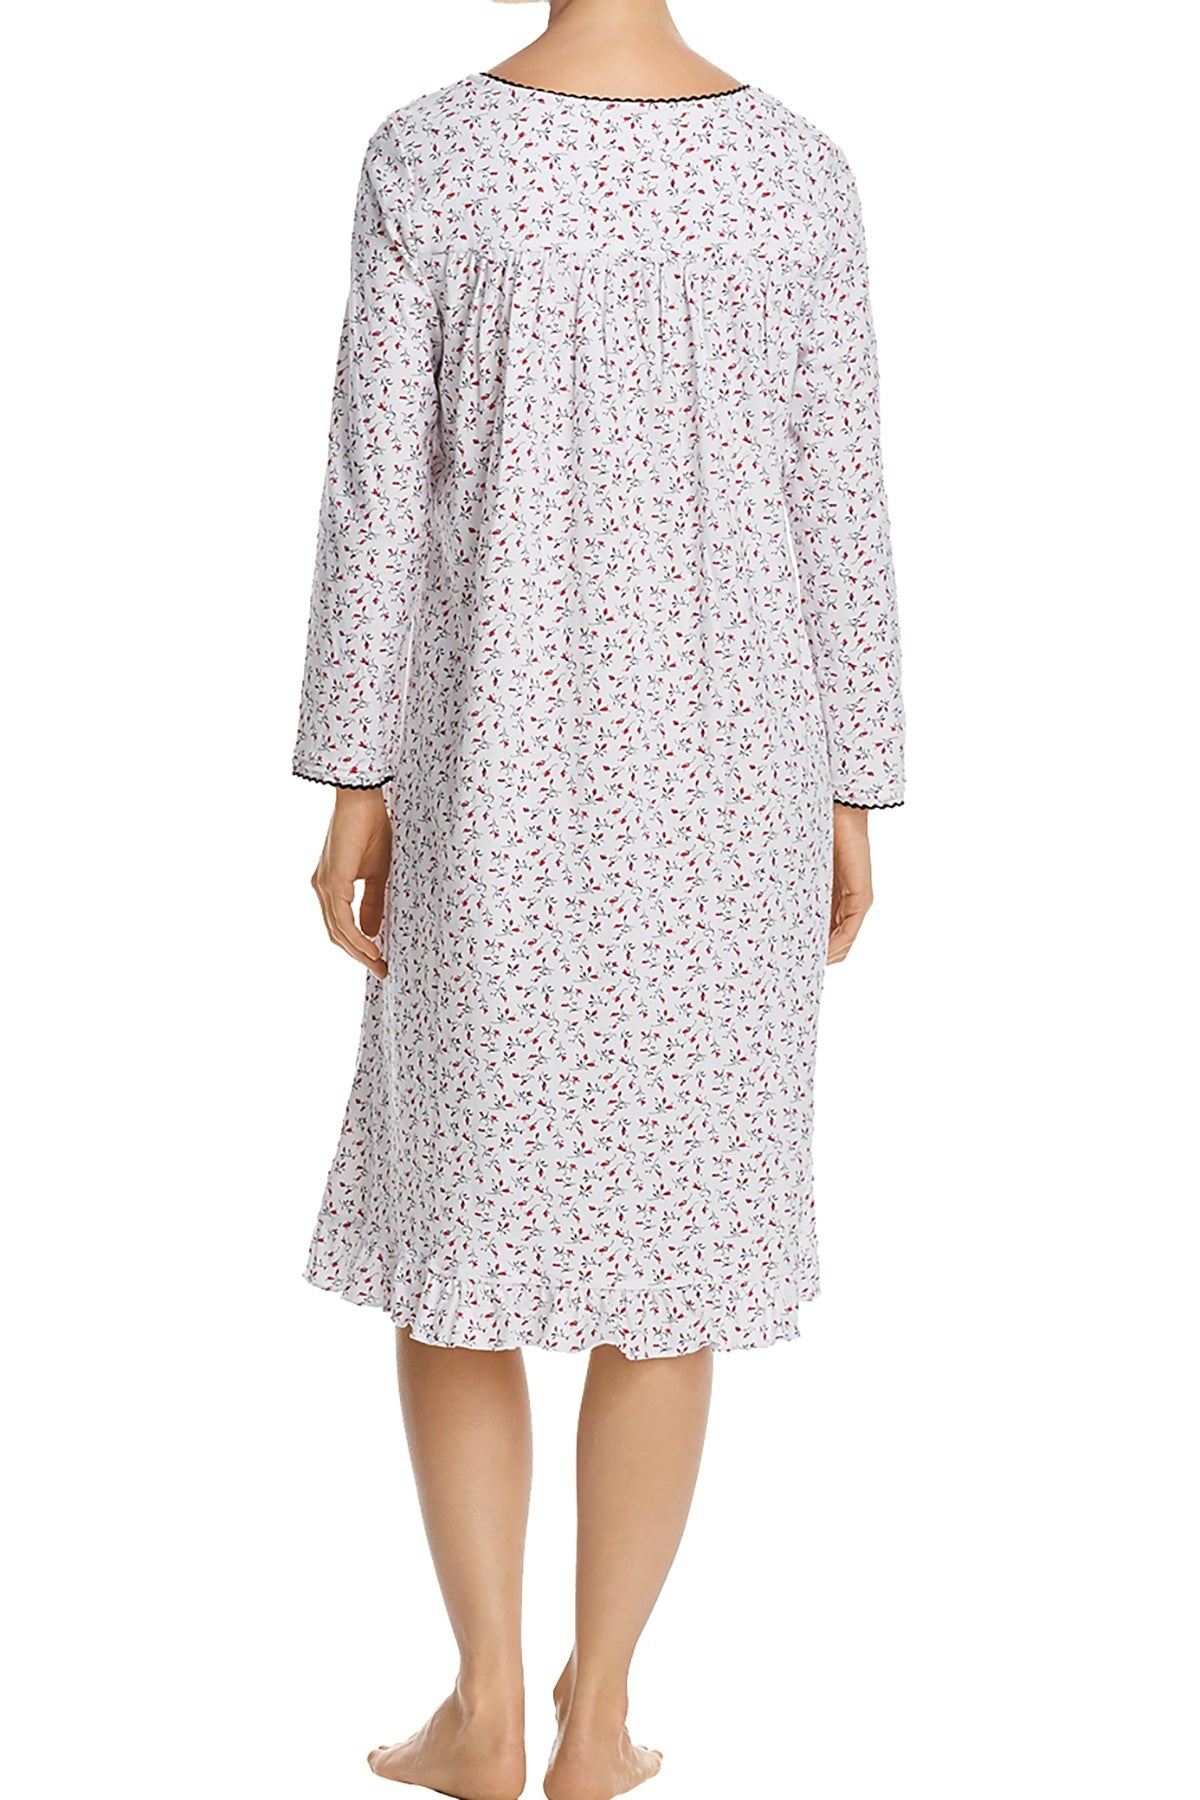 Eileen West White/Red Bud-Printed Long-Sleeve Waltz Nightgown